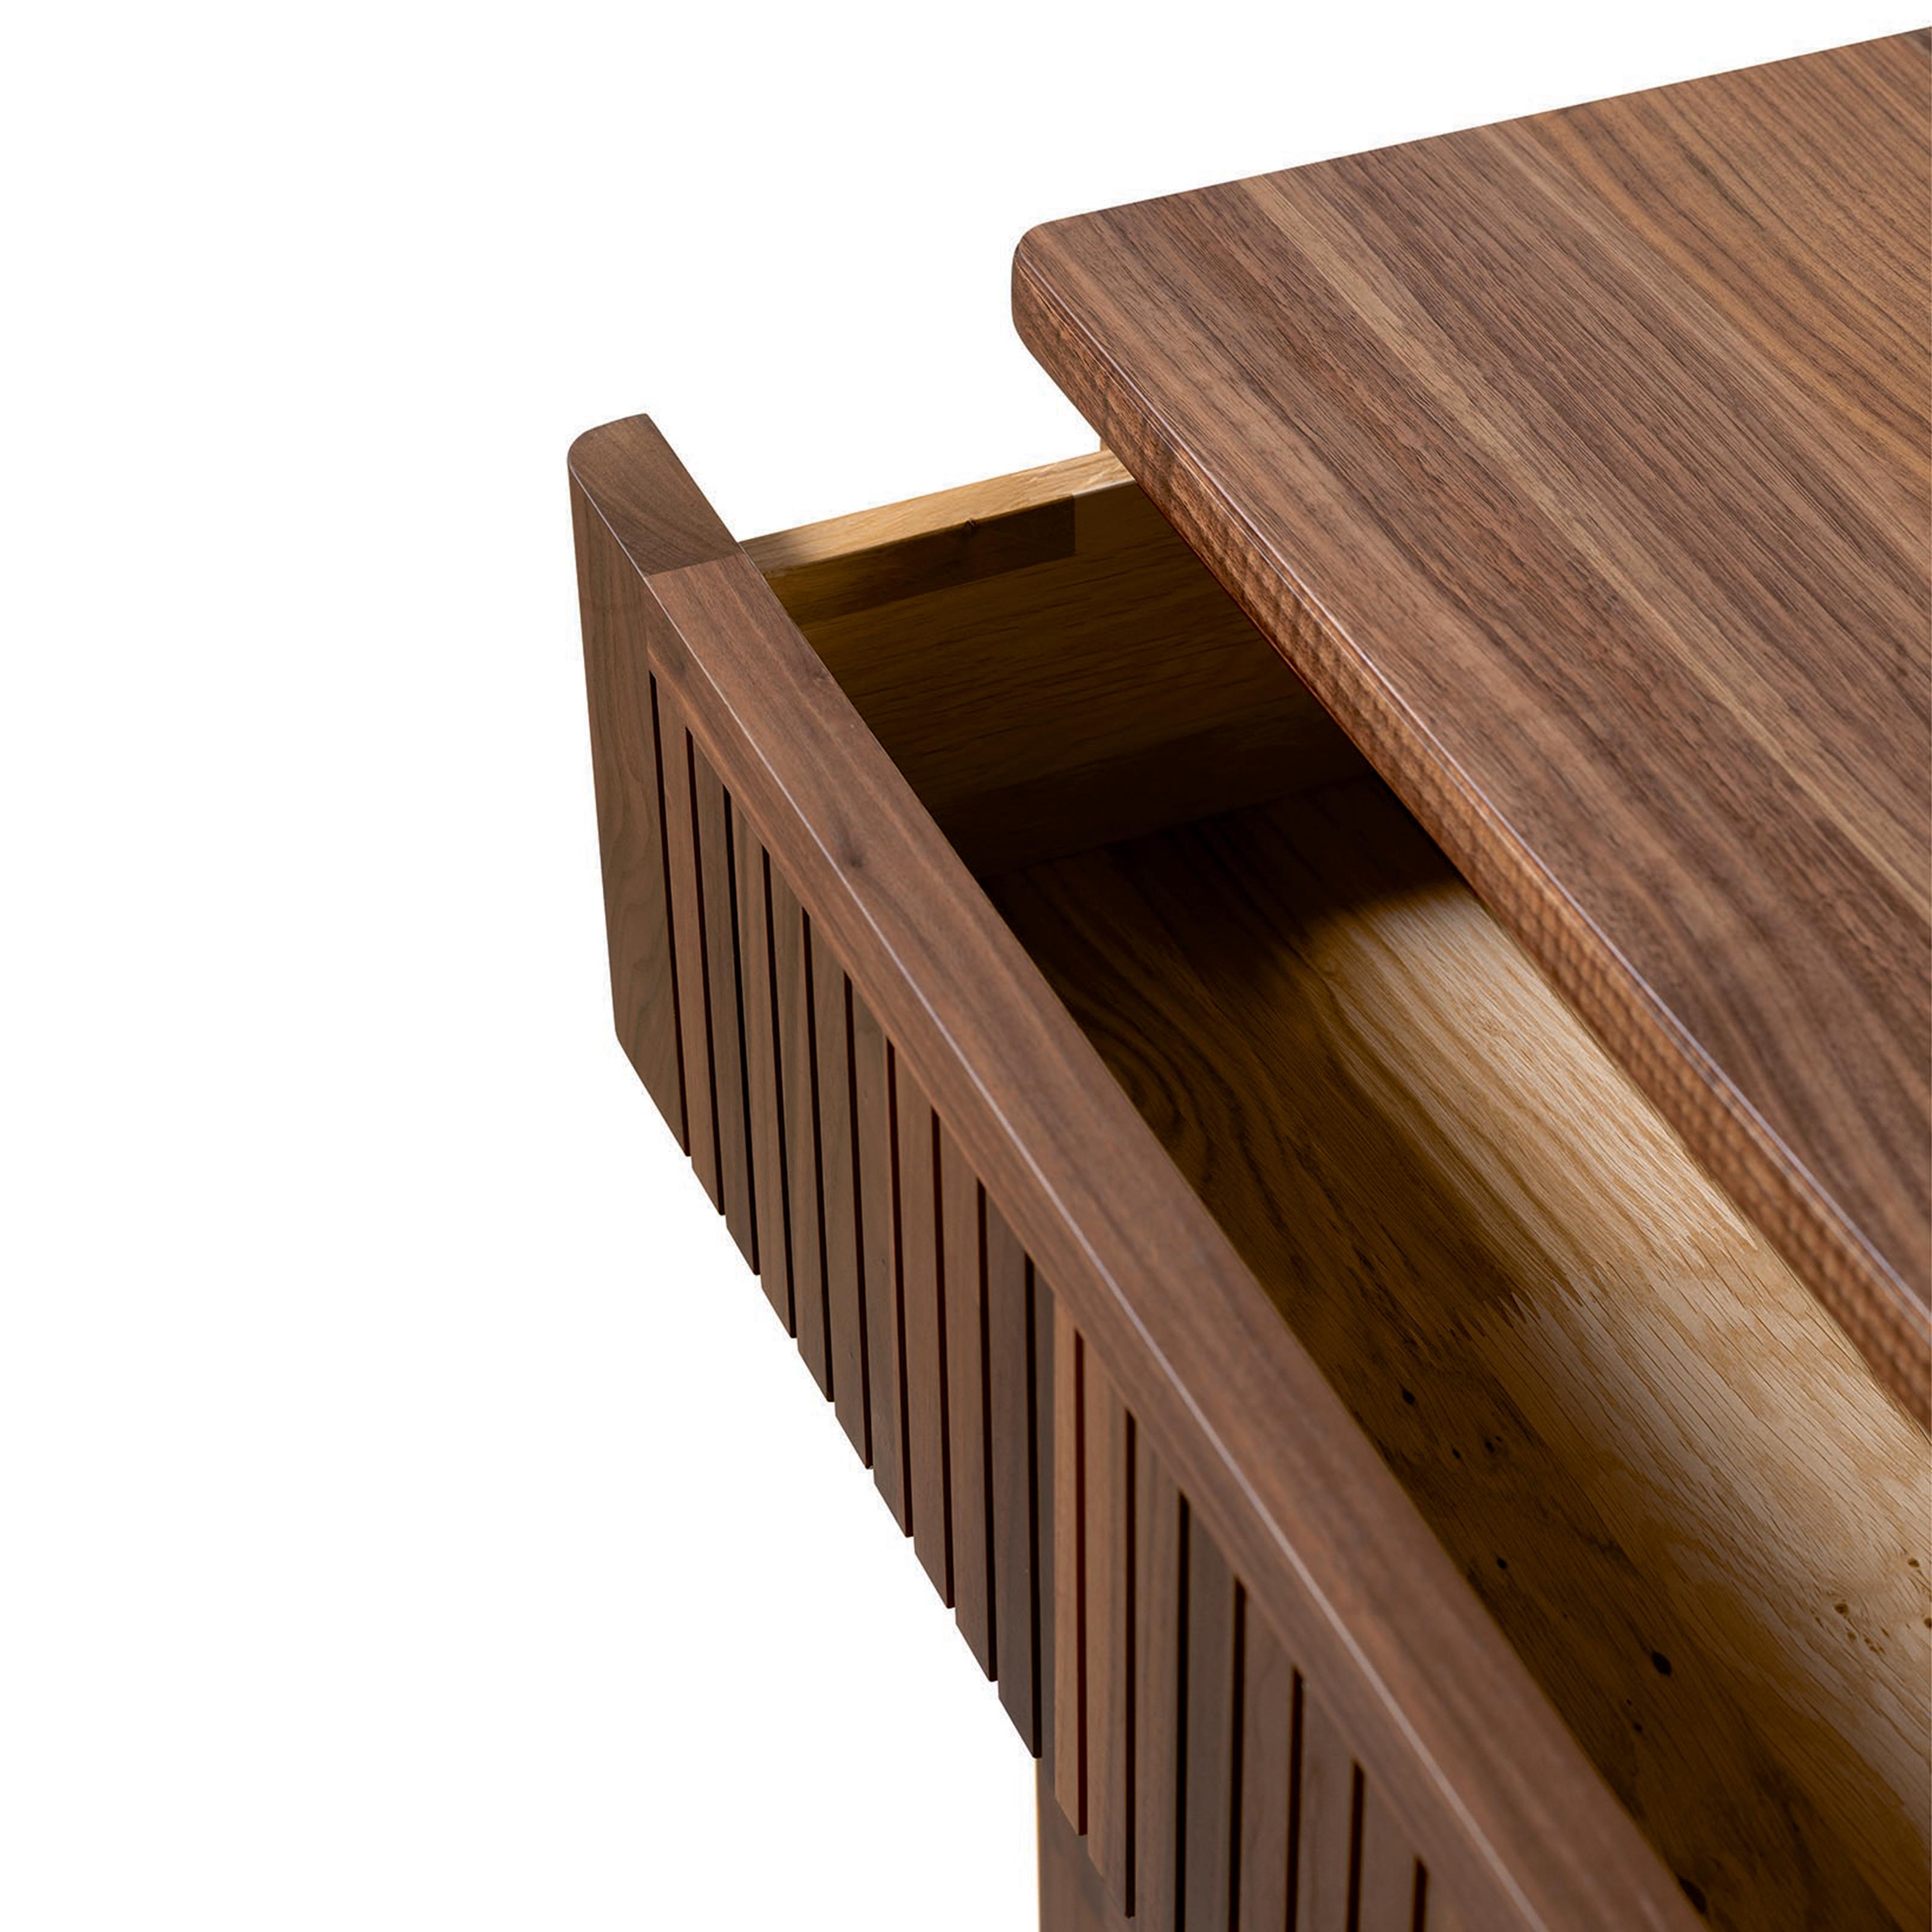 Italian Eleva Solid Wood Bedside table, Walnut in Hand-Made Natural Finish, Contemporary For Sale